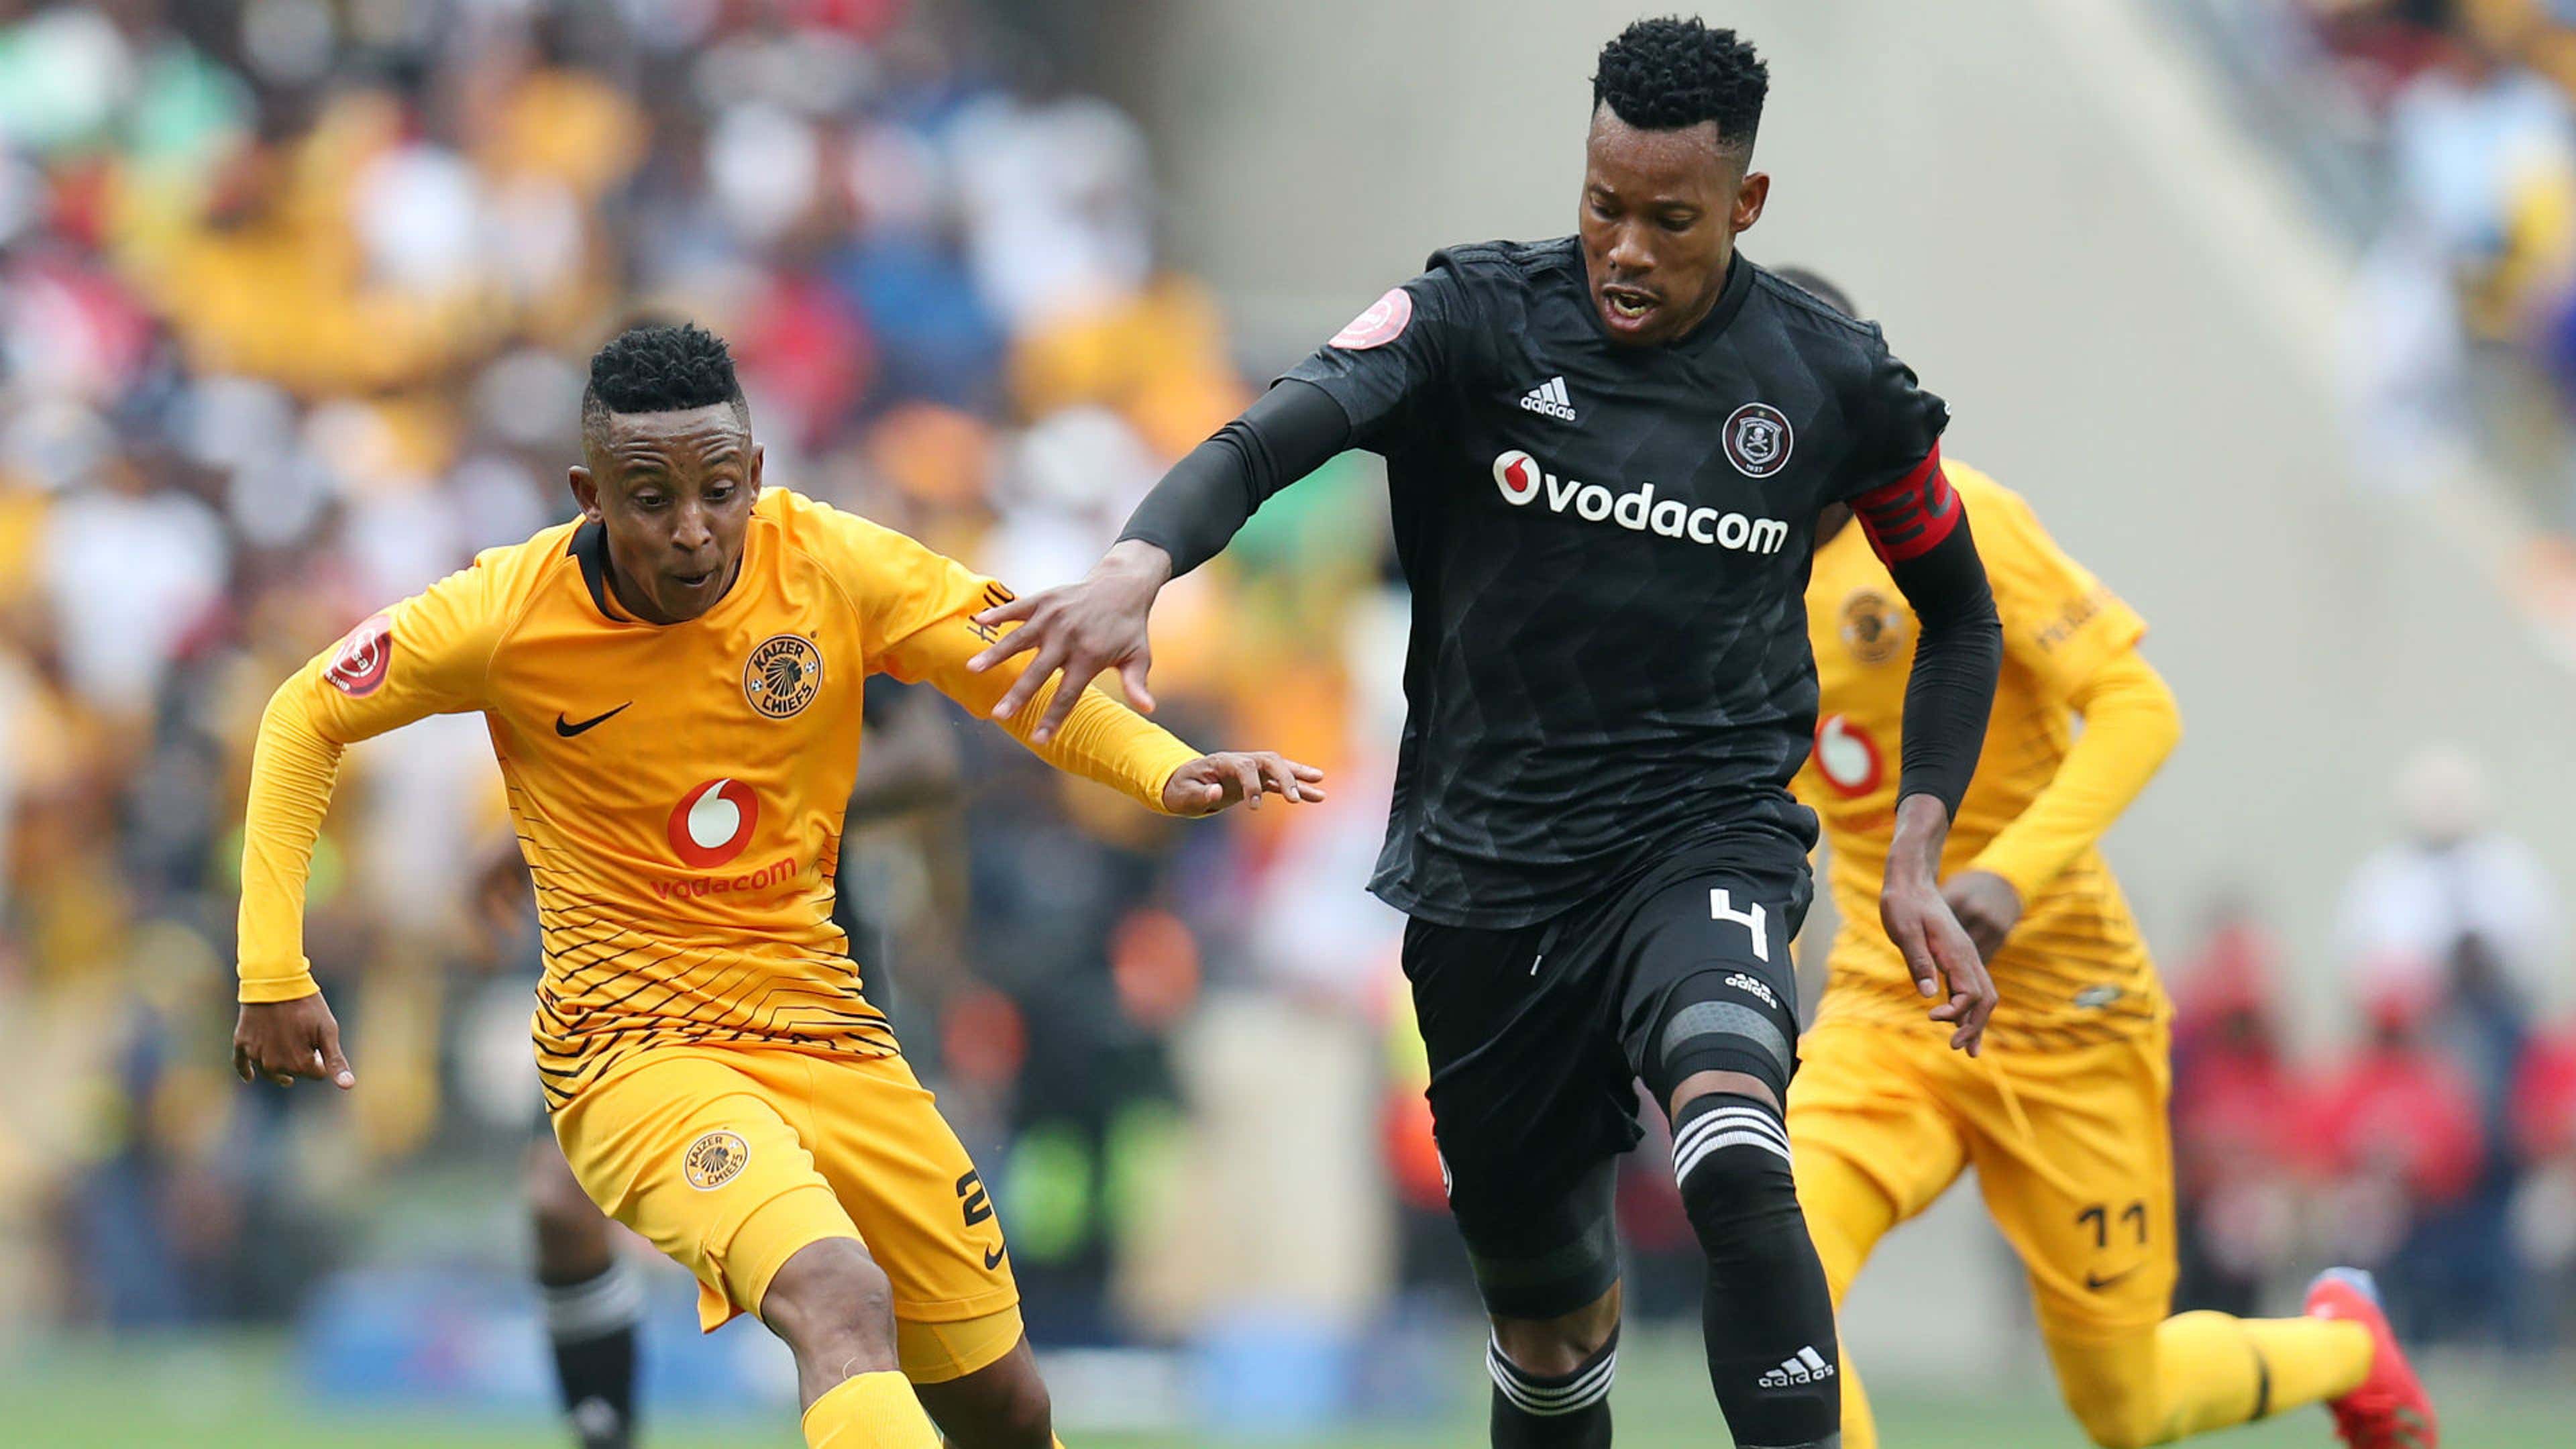 Jele's first Orlando Pirates teammates - Where are they now?